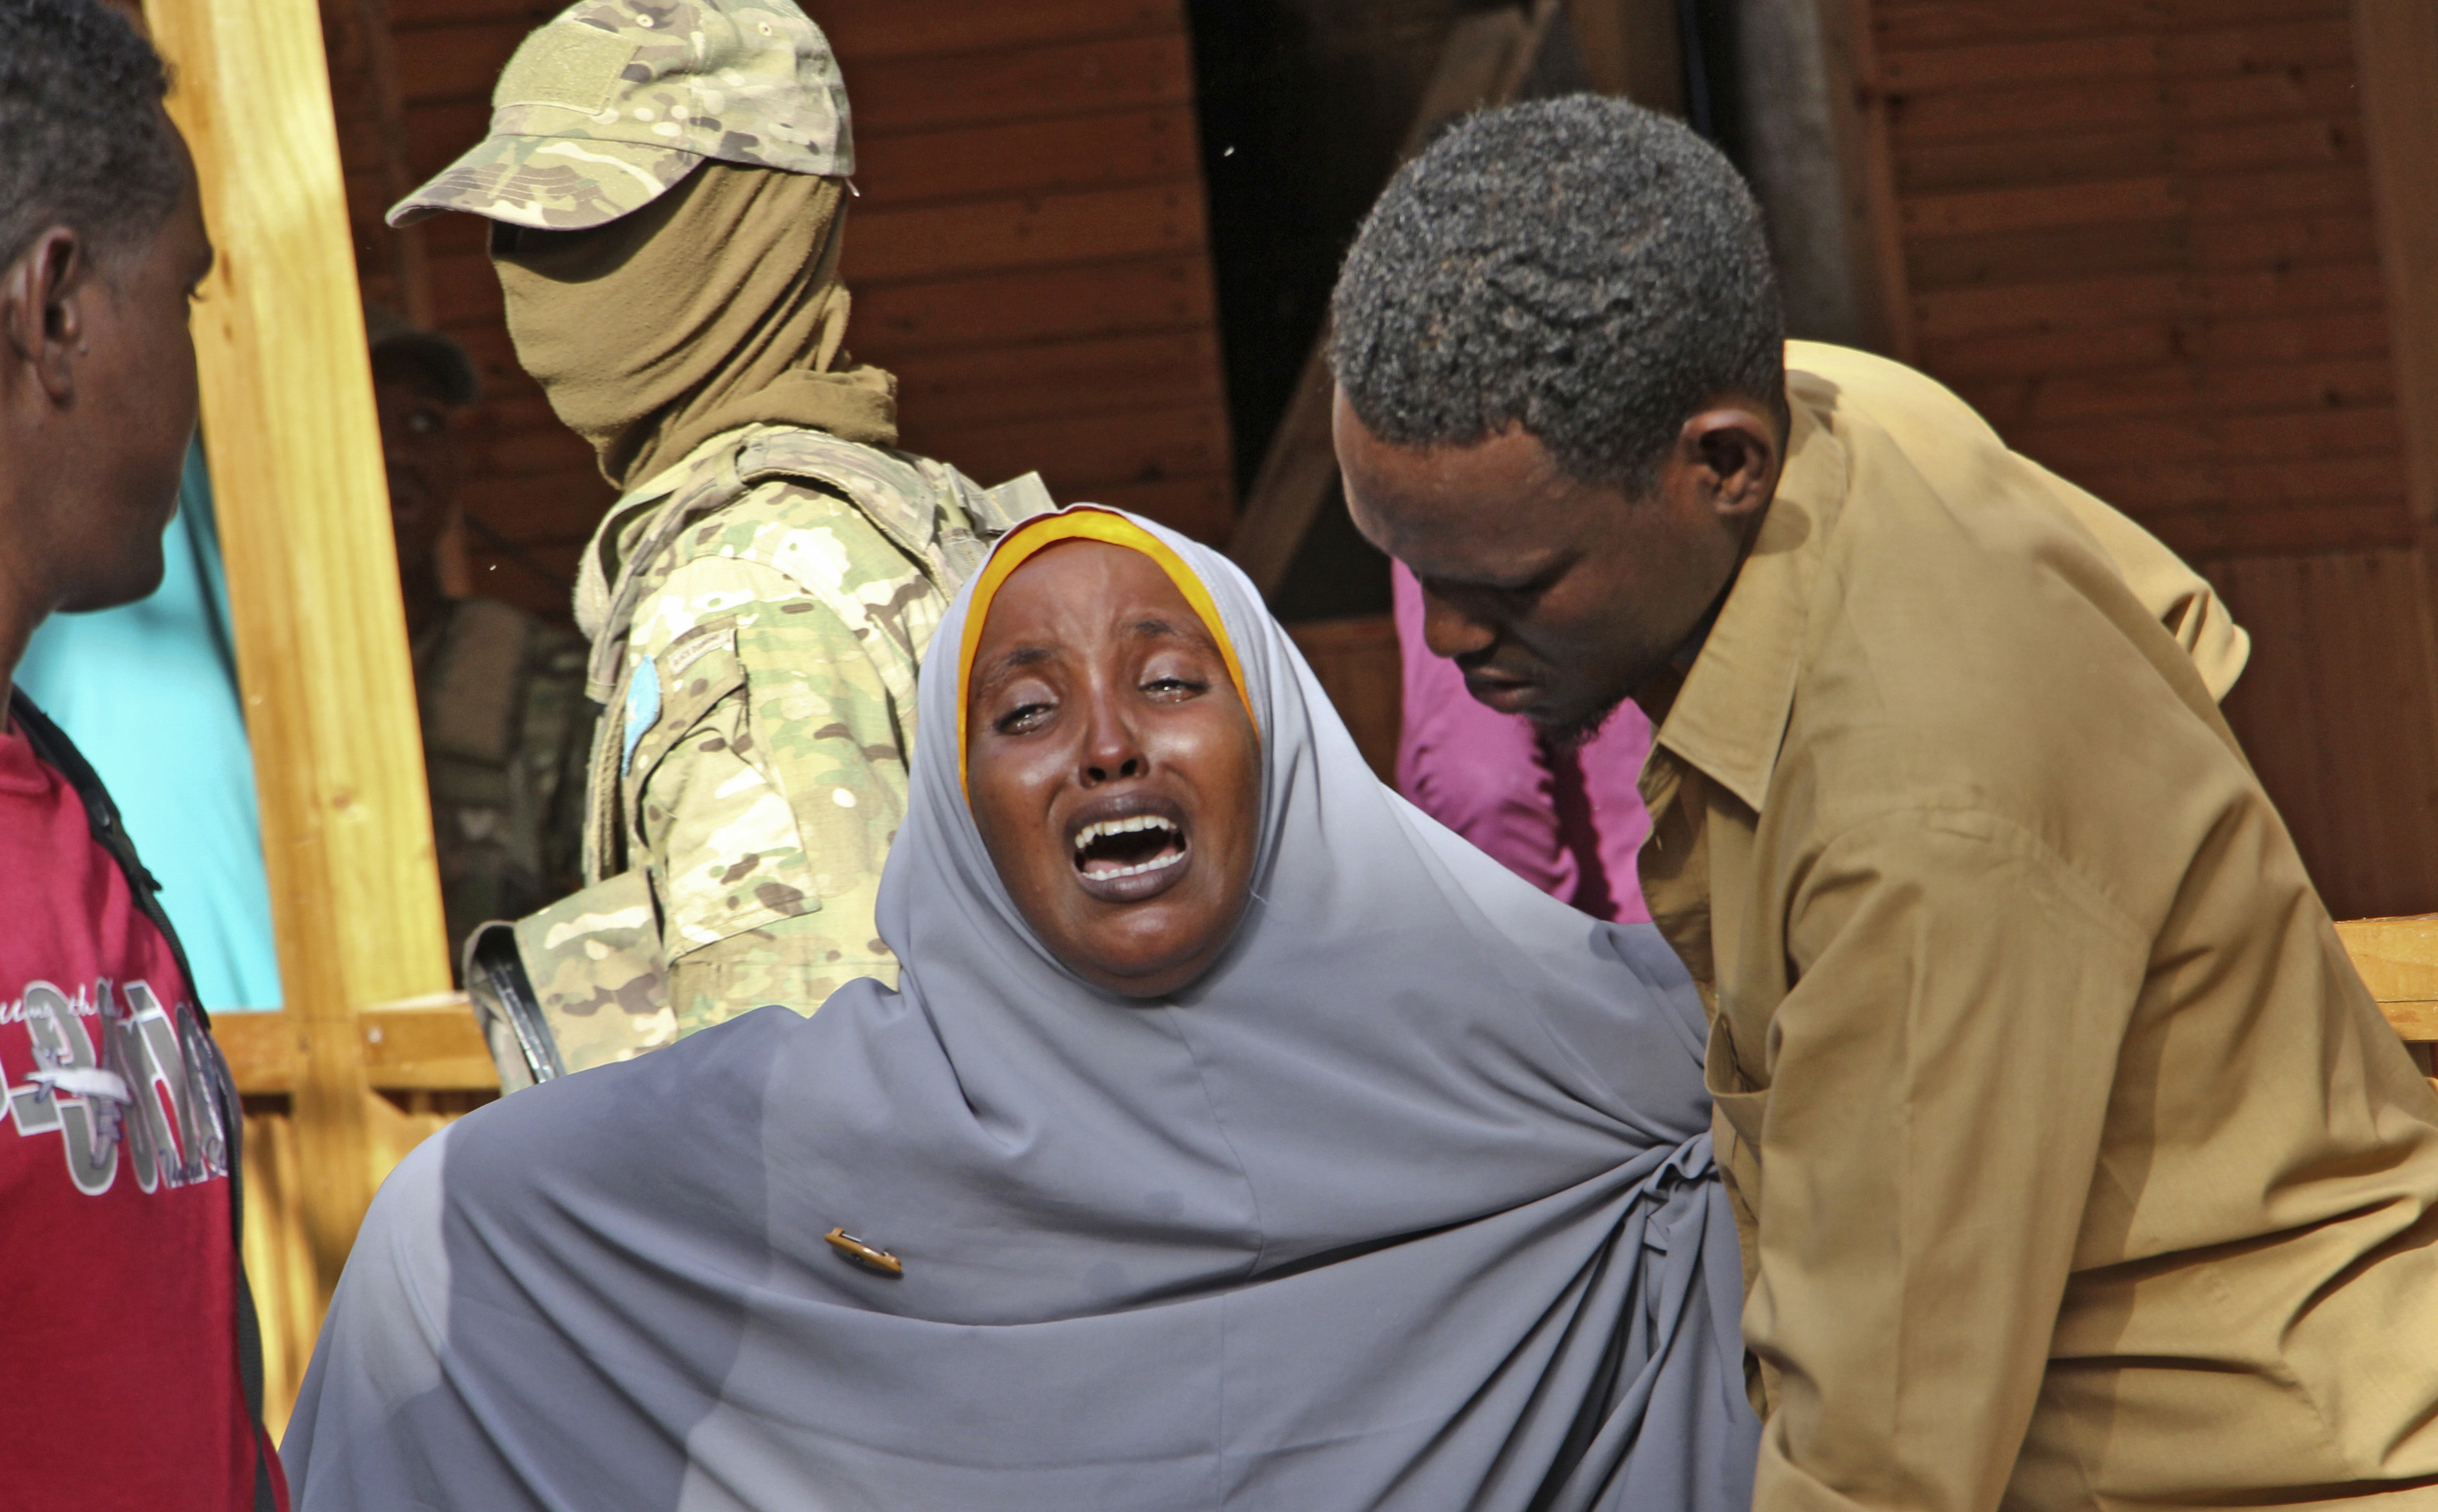 A mother whose daughter was shot in the head by attackers during a militant attack on a restaurant, grieves in Mogadishu, Somalia Thursday, June 15, 2017. Somalia's security forces early Thursday morning ended a night-long siege by al-Shabab Islamic extremists at the popular 